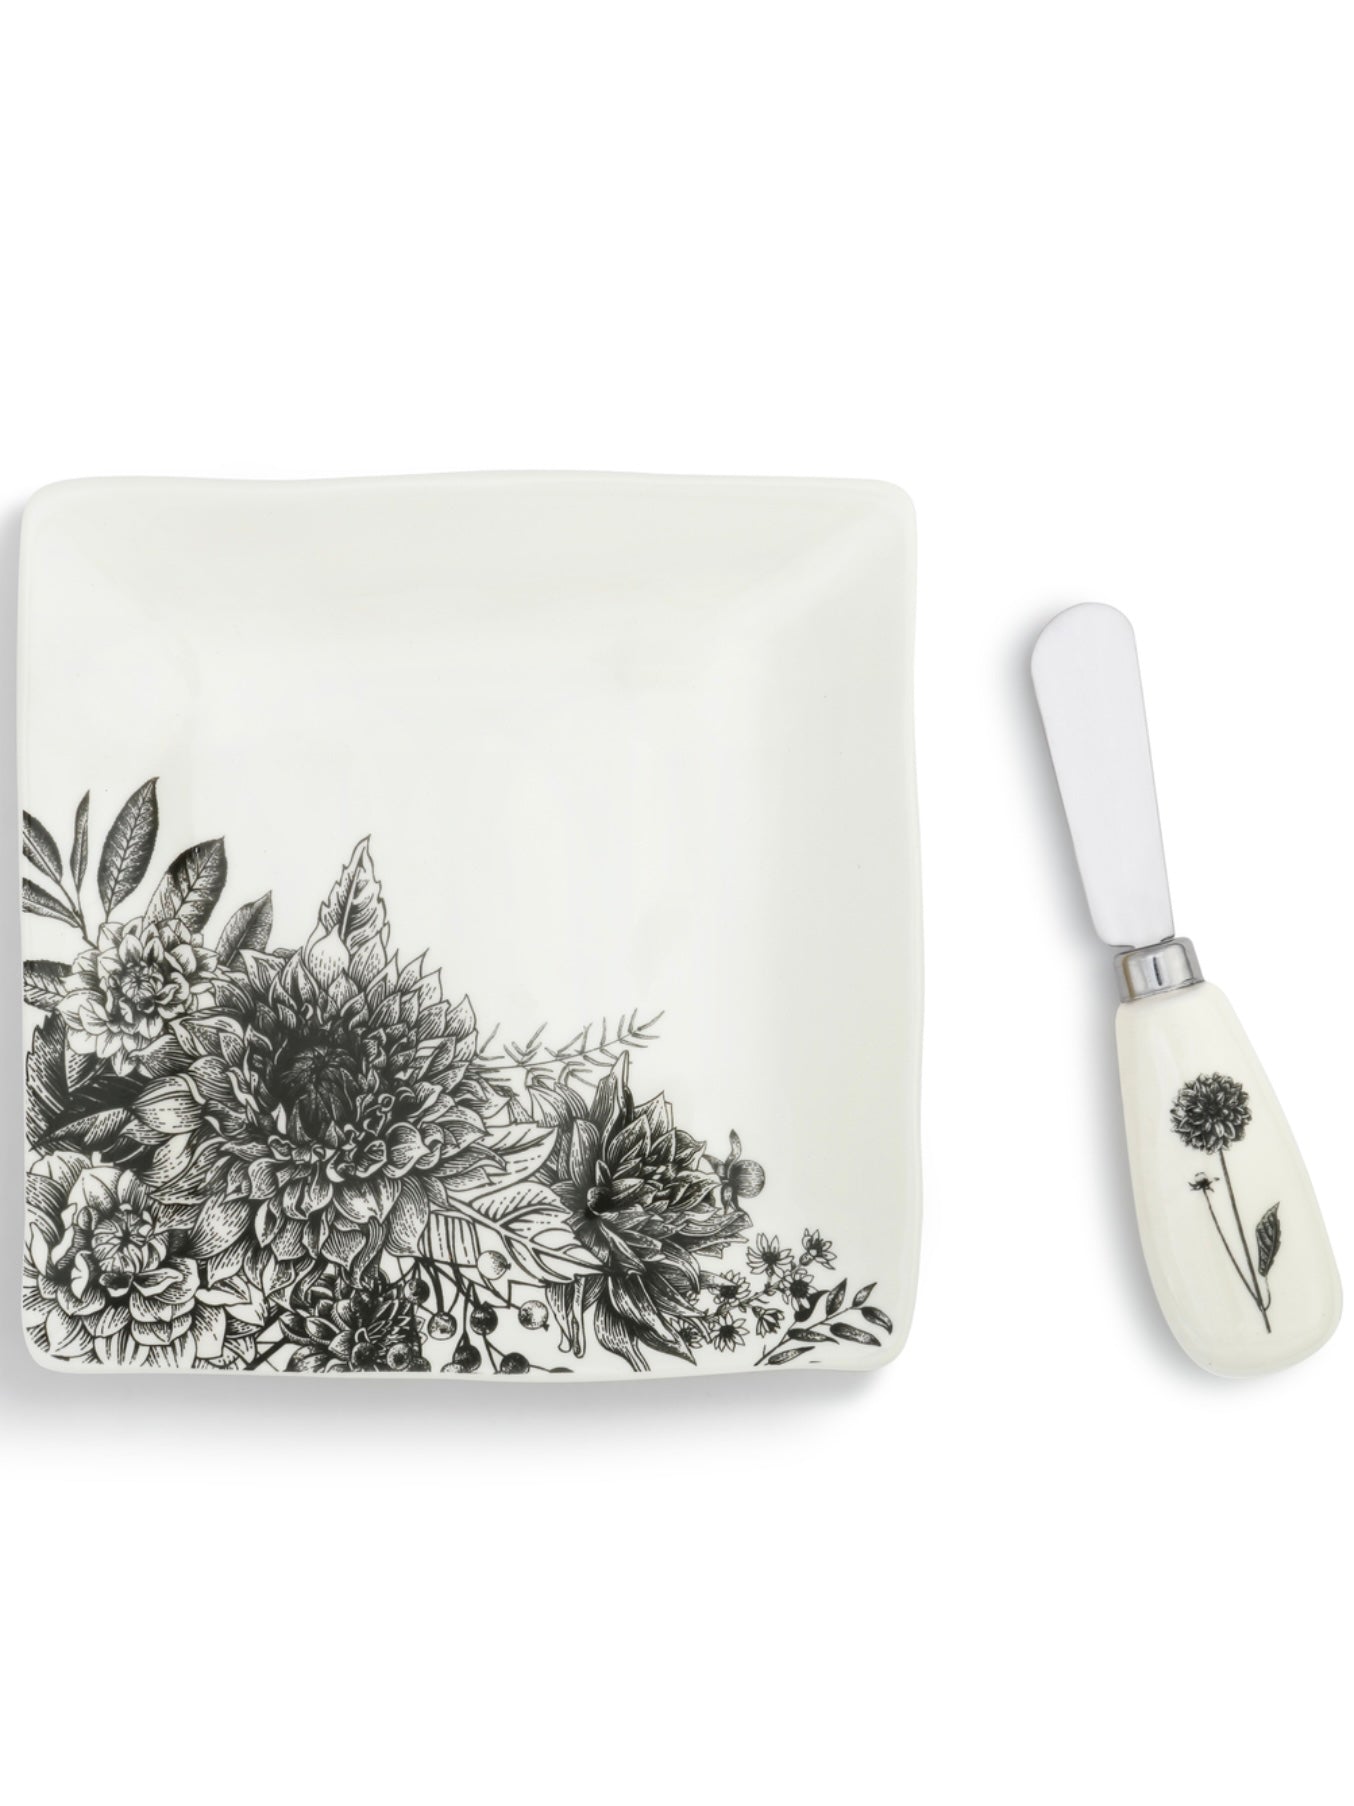 Floral Plate with Spreader Set